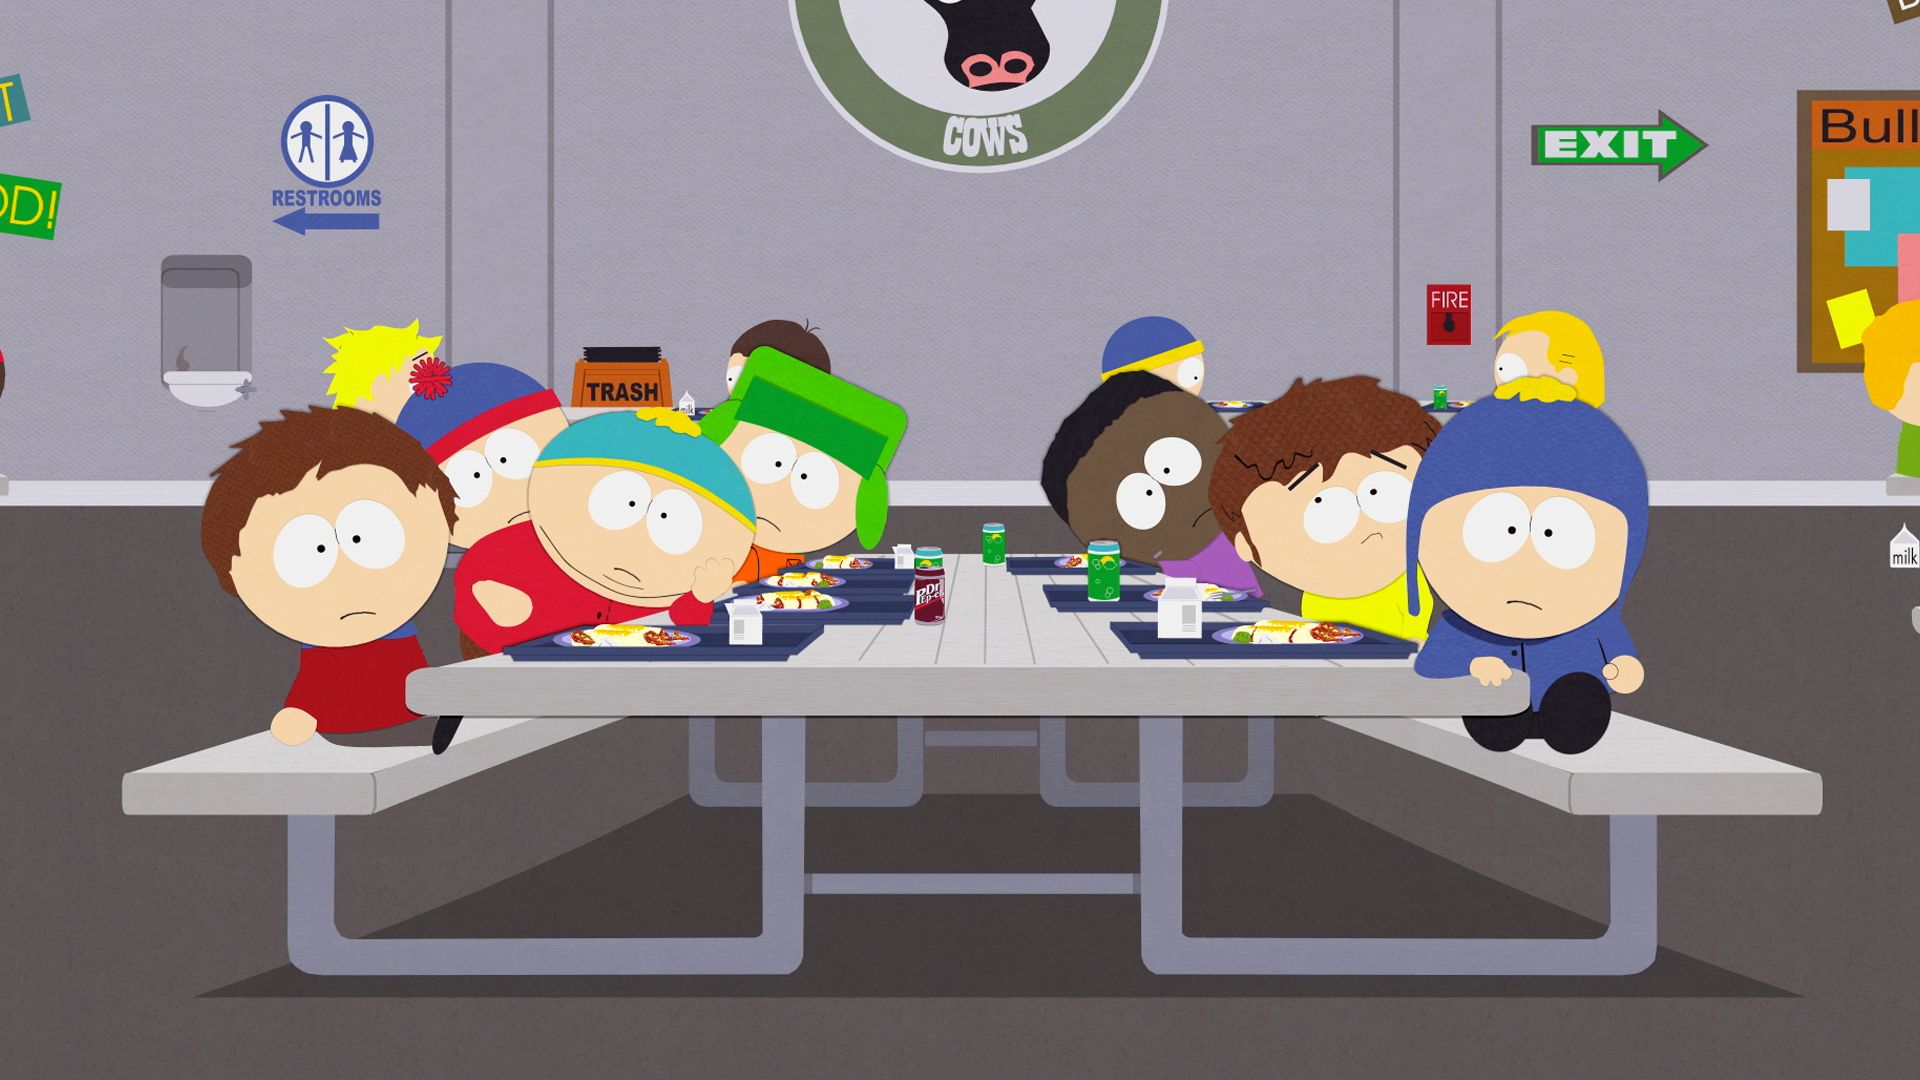 Hey Jimmy, What's a B.J.? - Seizoen 13 Aflevering 1 - South Park